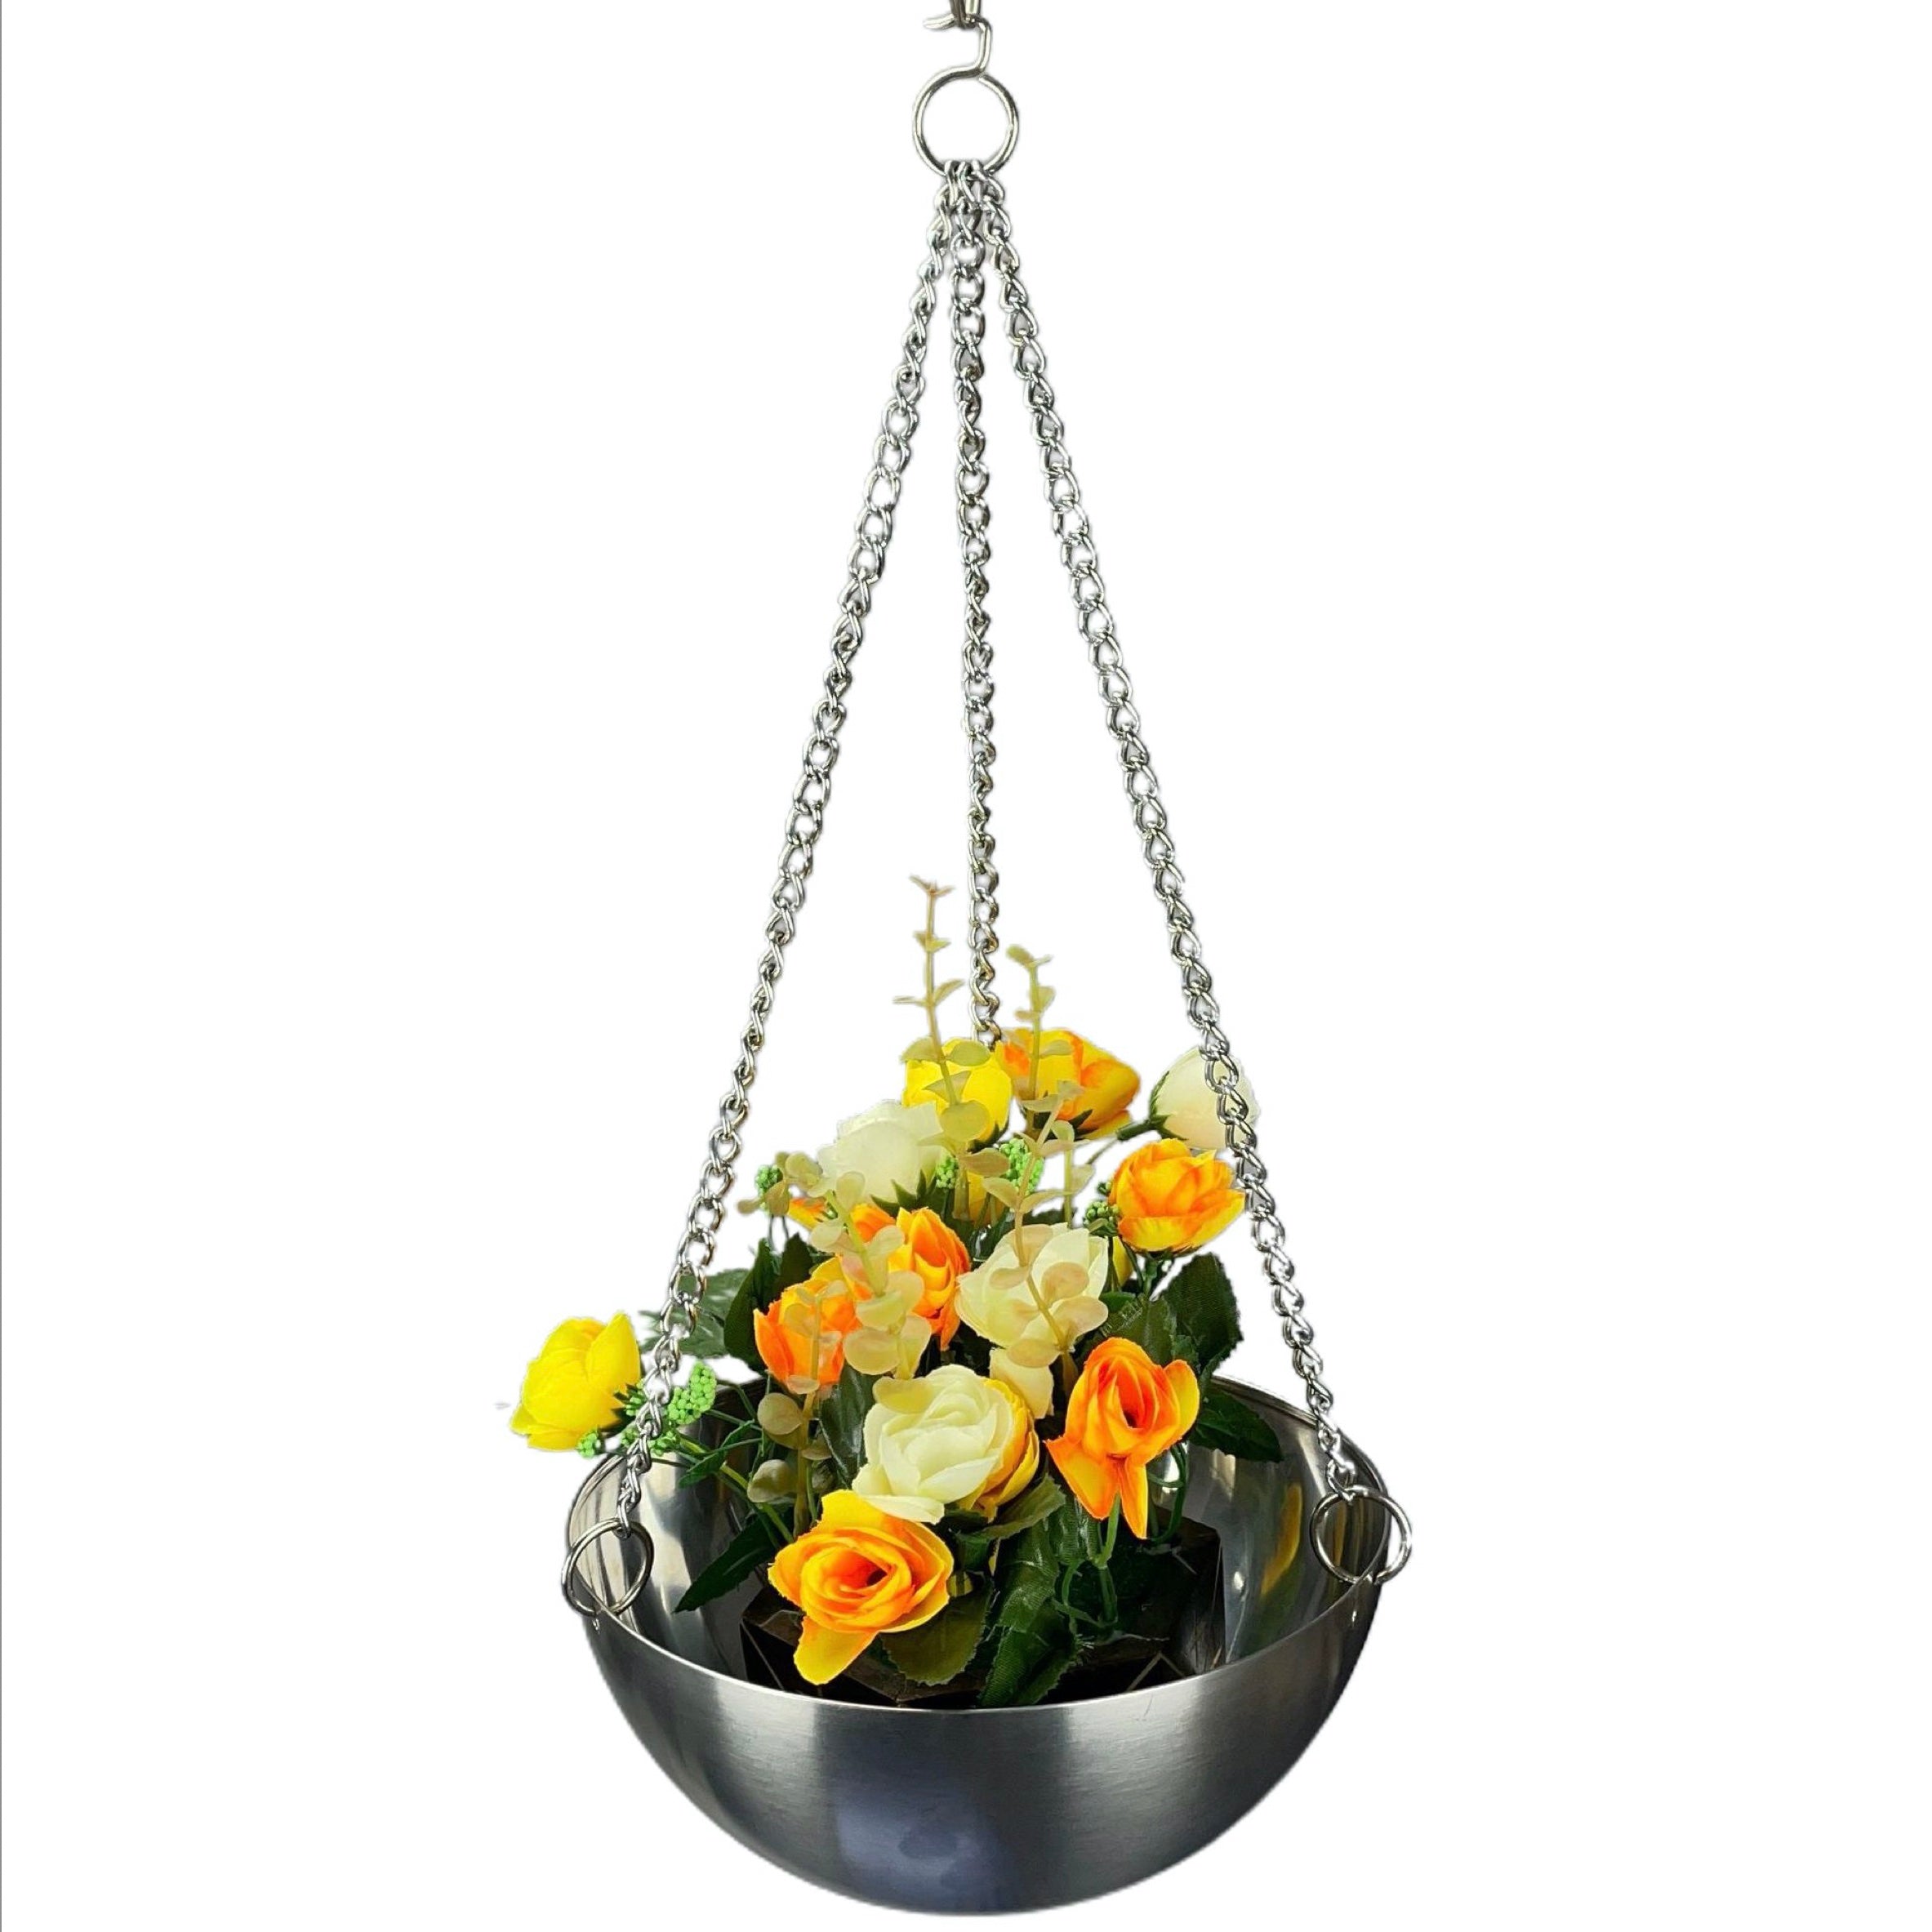 Hanging Planter Stand with Steel Bowl and Steel Chain